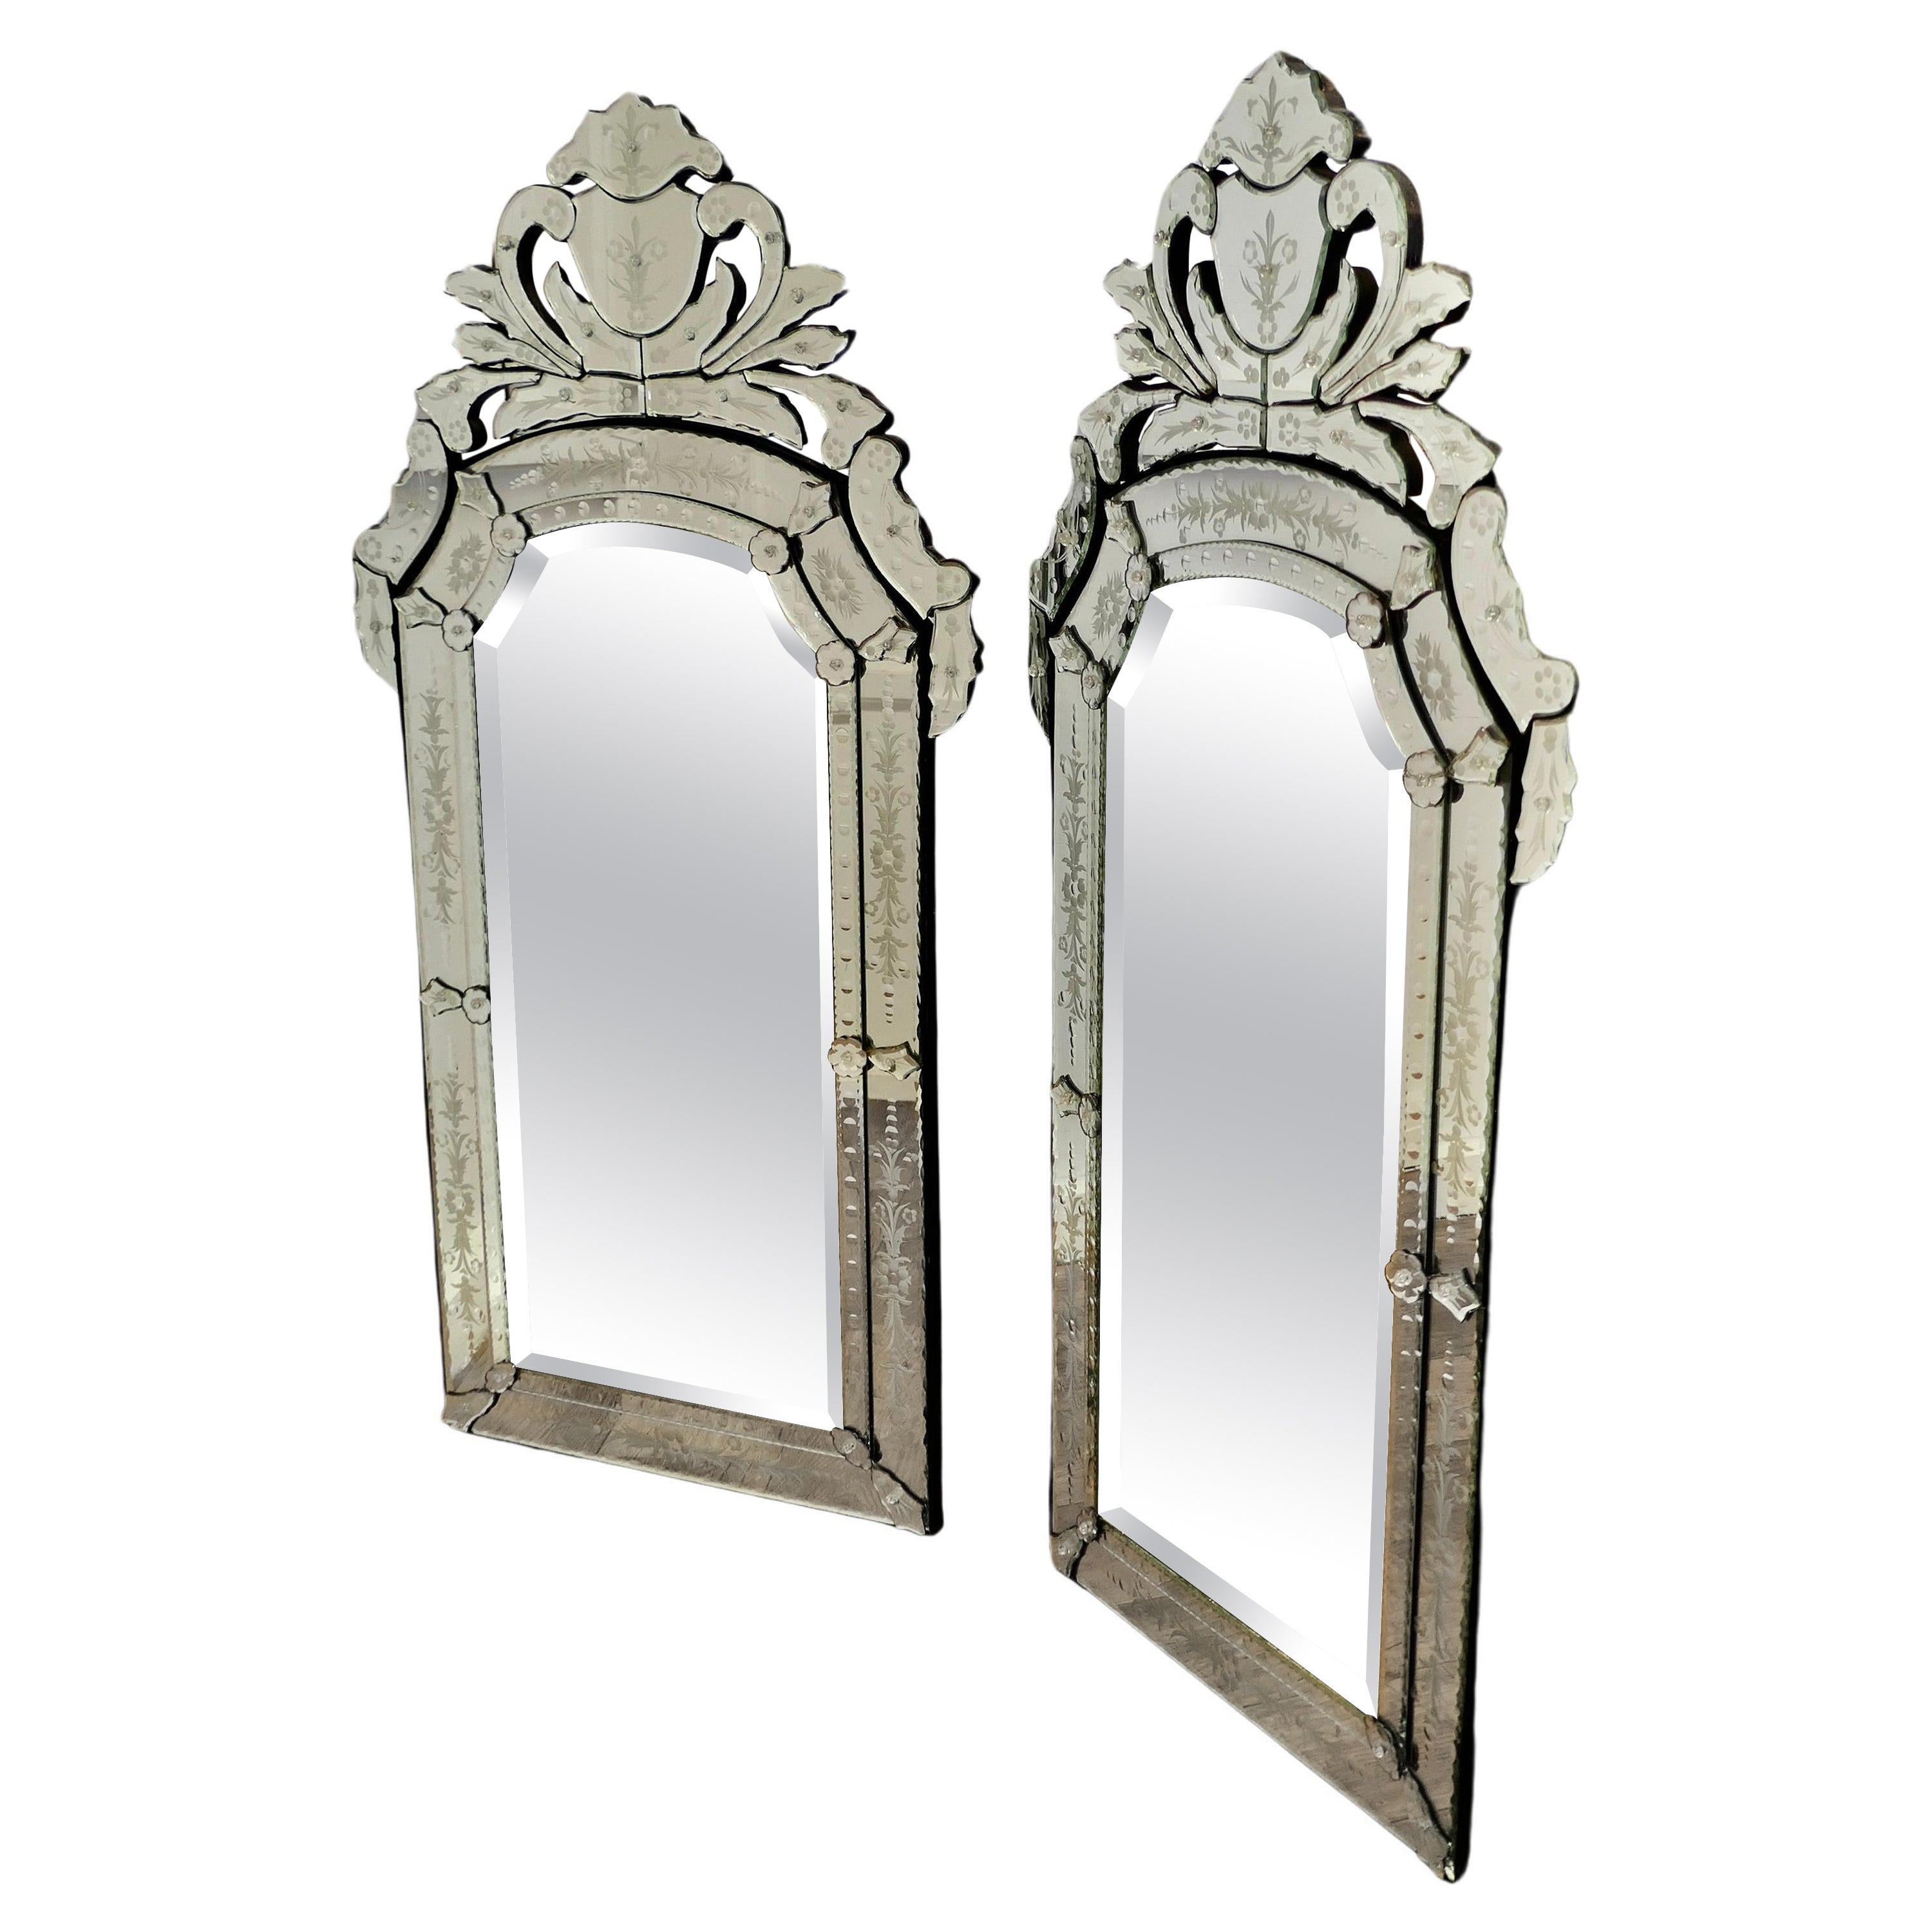 A Superb Pair of Large Venetian Pier Mirrors  These are  most outstanding pieces For Sale